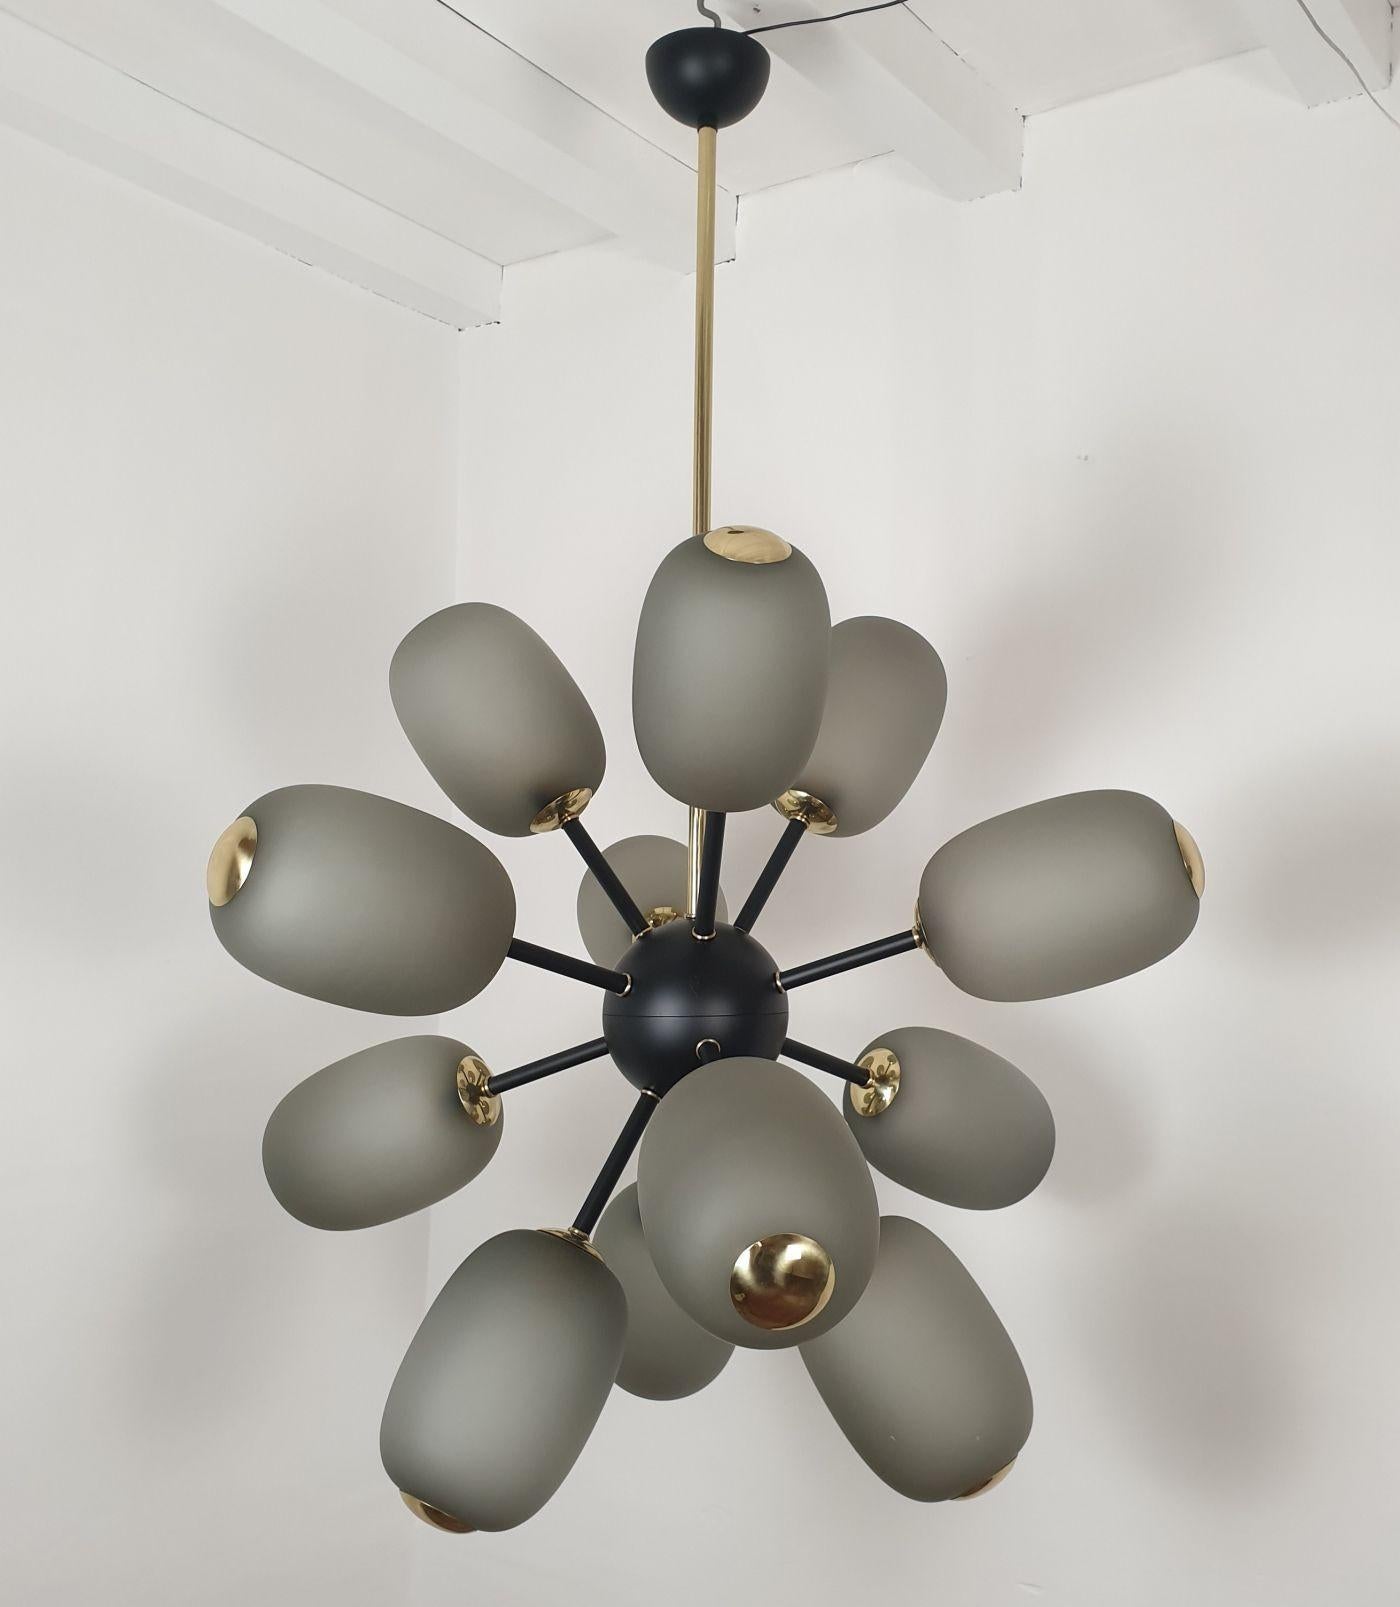 Very large Sputnik chandelier, attributed to Barovier and Toso, Italy 1990s.
The Mid-Century Modern chandelier is made of 12 light-grey Murano glass globes, a black painted frame, and brass elements.
It has 1 light in each glass: 12 total. Rewired